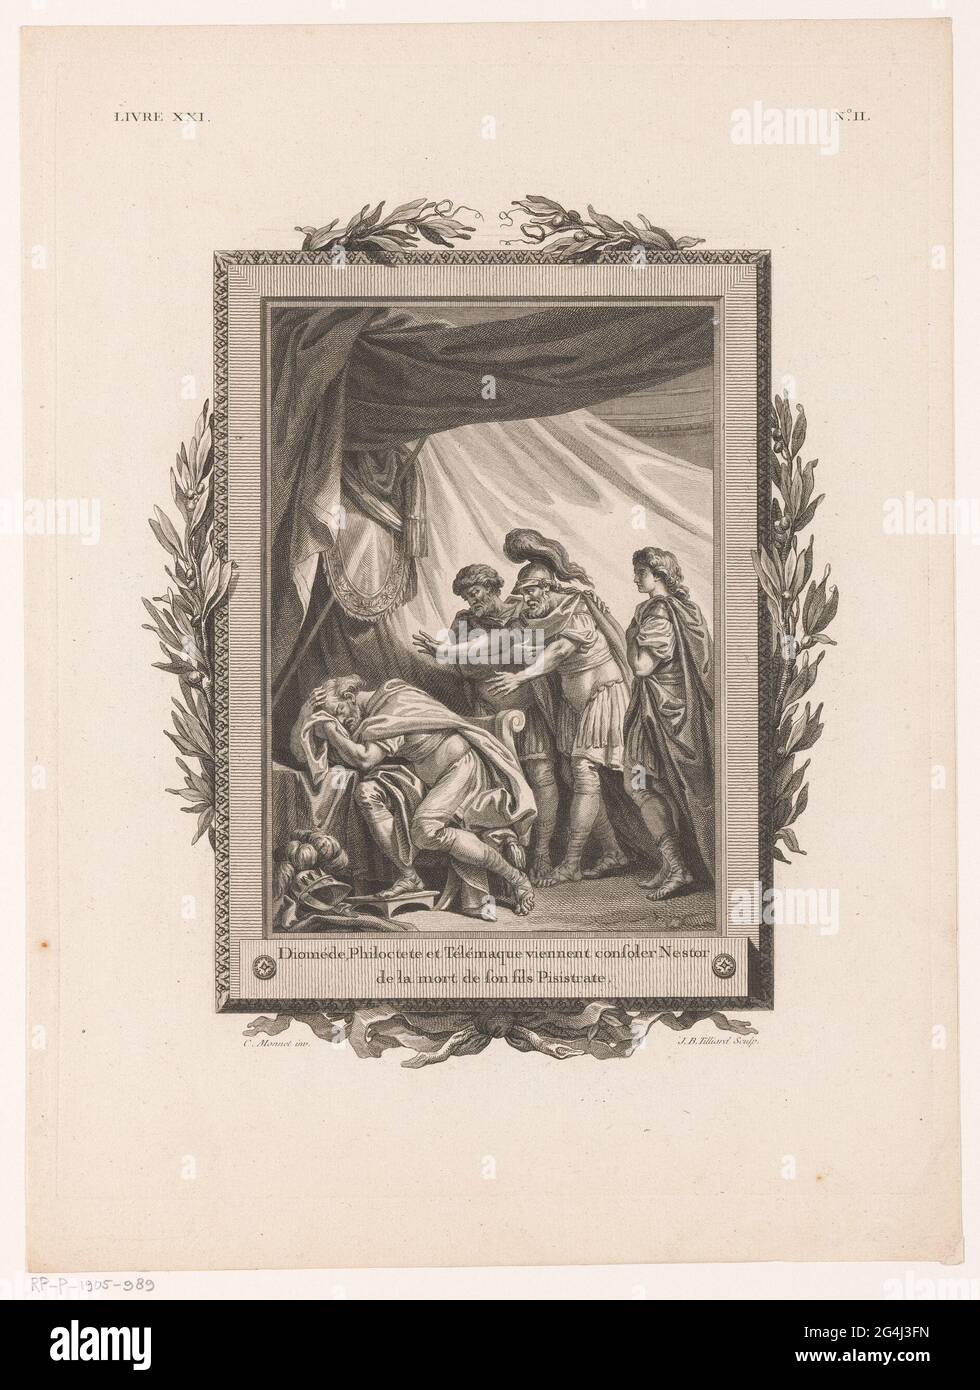 Telemachus, Philoktetes and Diomedes comfort nestor after the loss of his son. Nestor, seated at a table in a tent with his head in his hands, is visited by Telemachus, Philoktetes and Diomedes who walk into the tent behind him. The whole is chattered by a decorative frame with olive branches and at the bottom of a bow. Numbered at the top right: No. II. Stock Photo